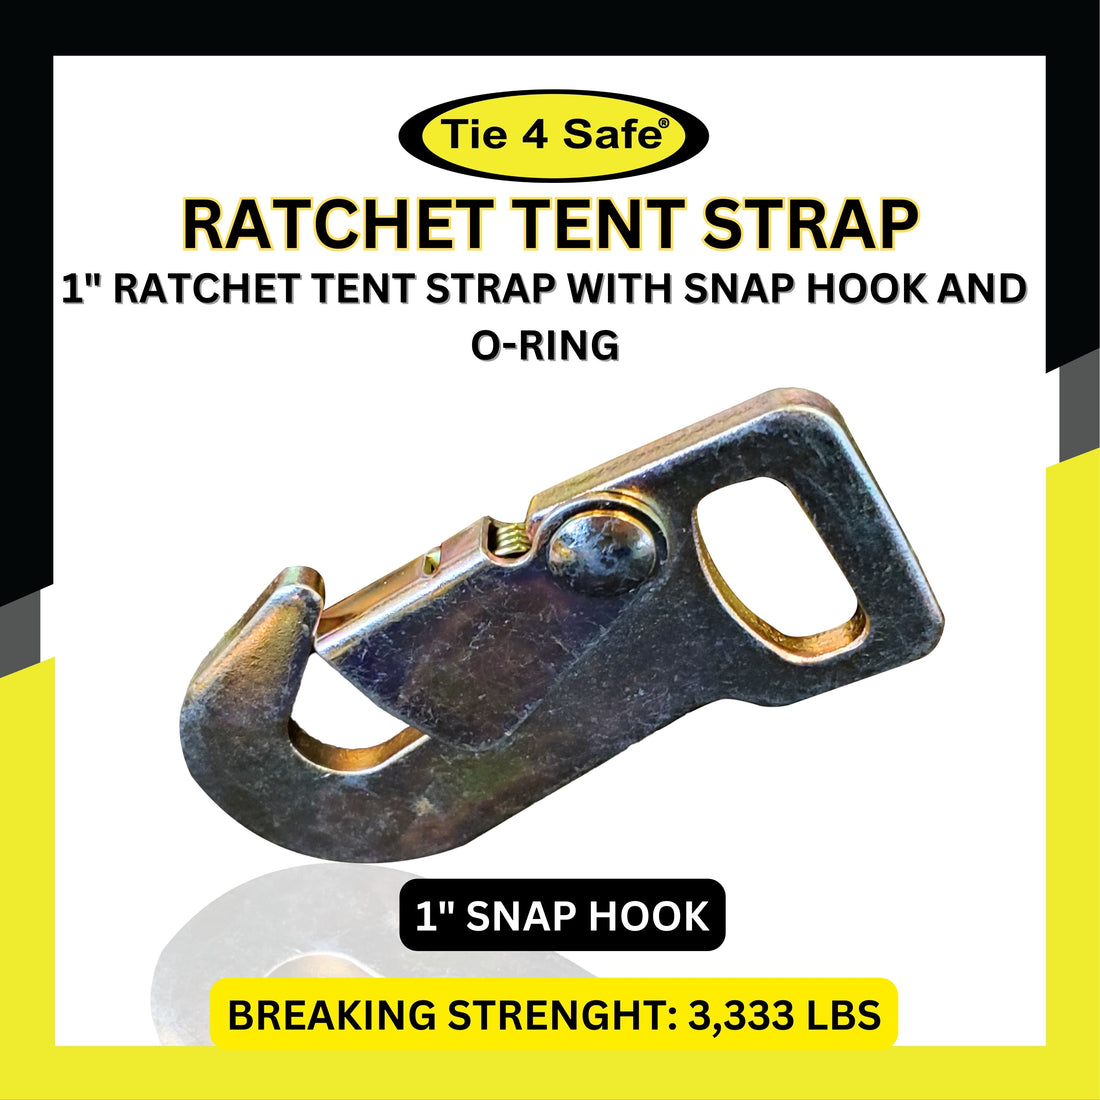 1 Inch Ratchet Buckle Tent Strap With Snap Hook And O-Ring